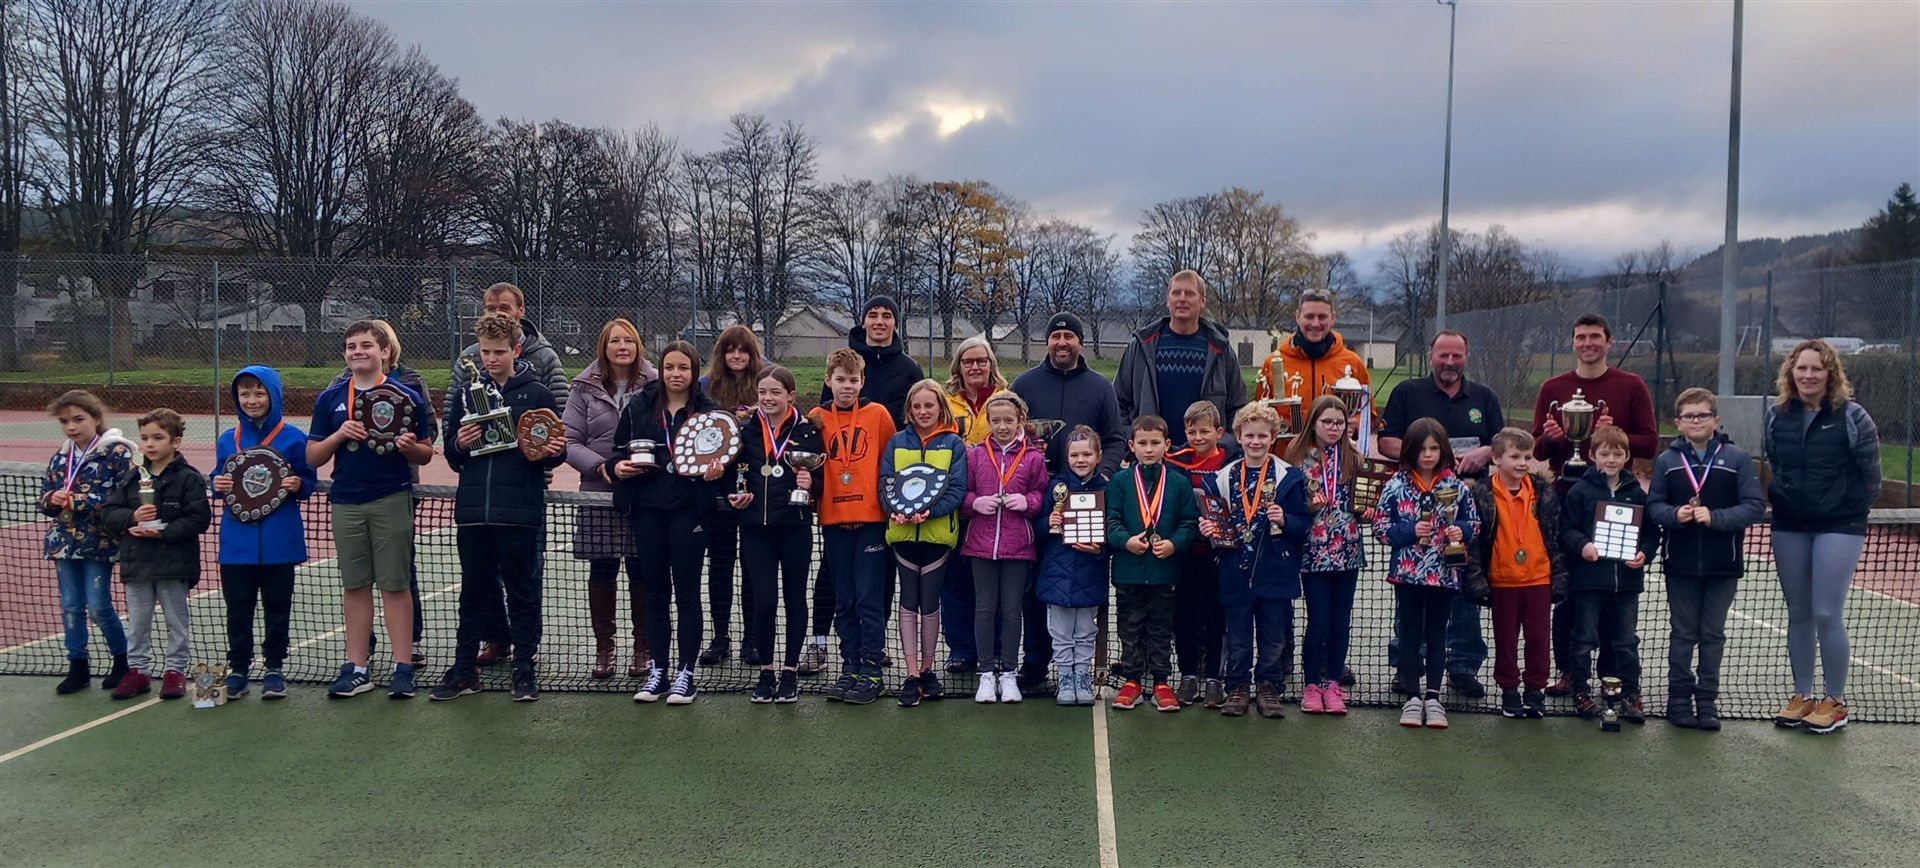 Some of the Rothes Tennis Club award winners.